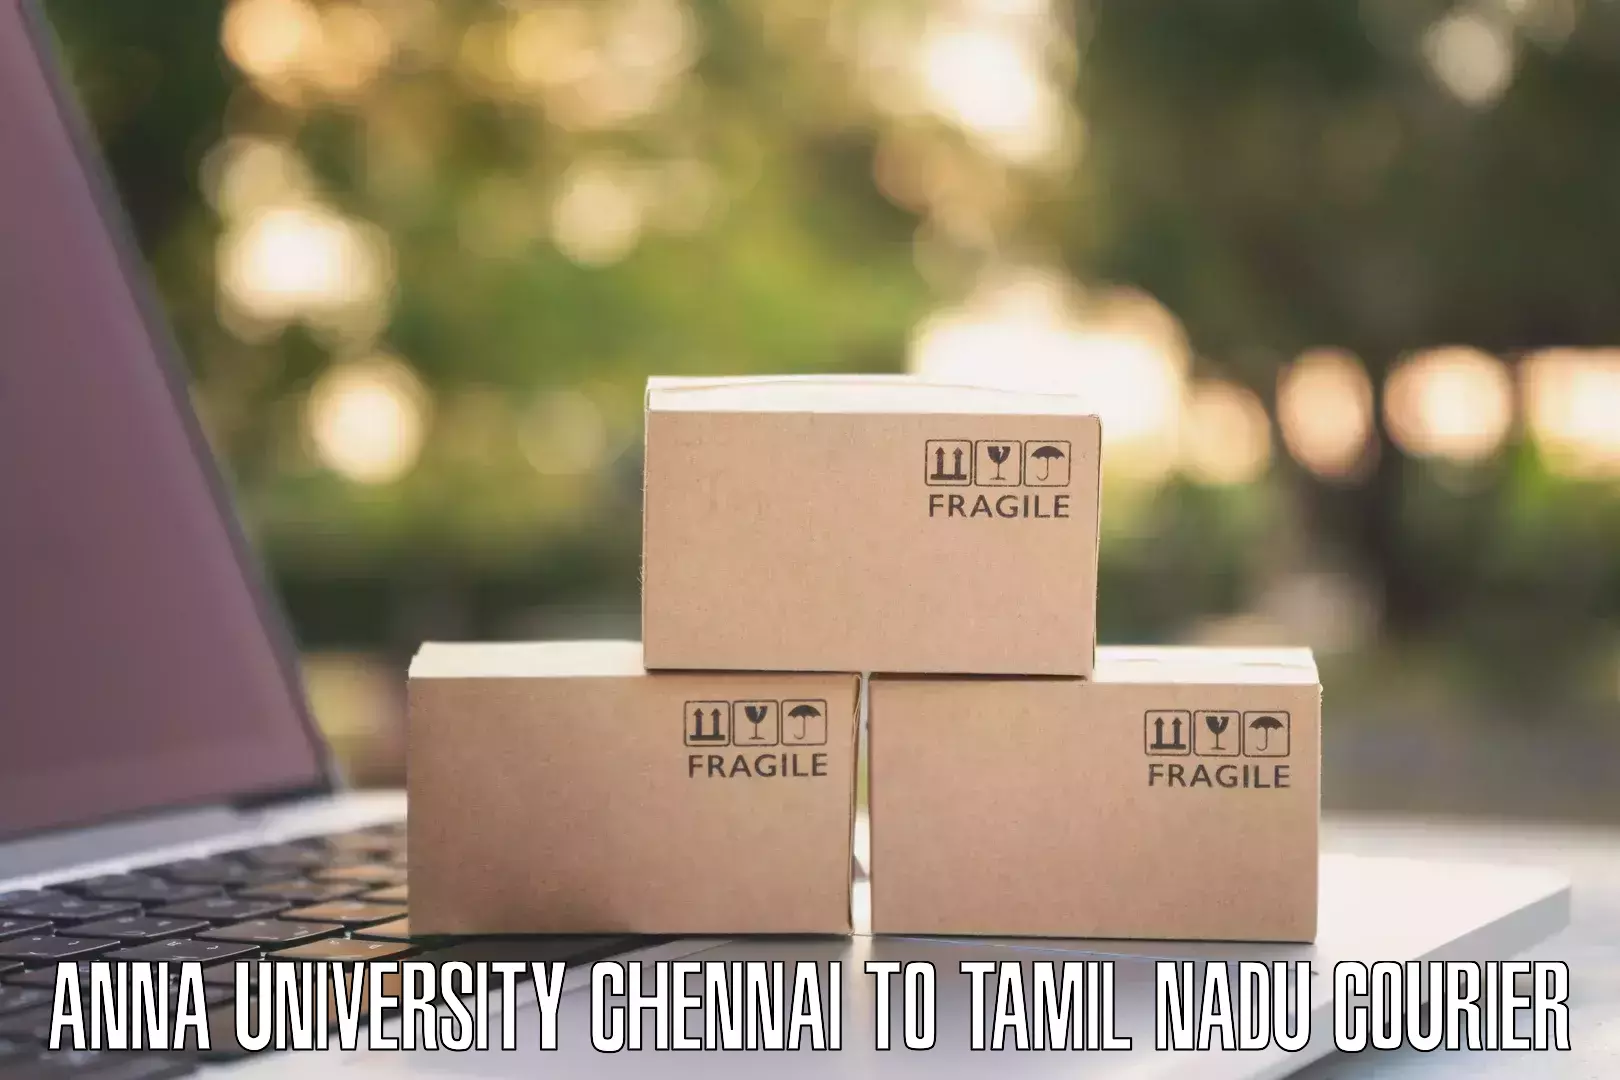 Custom courier packages in Anna University Chennai to Tamil Nadu